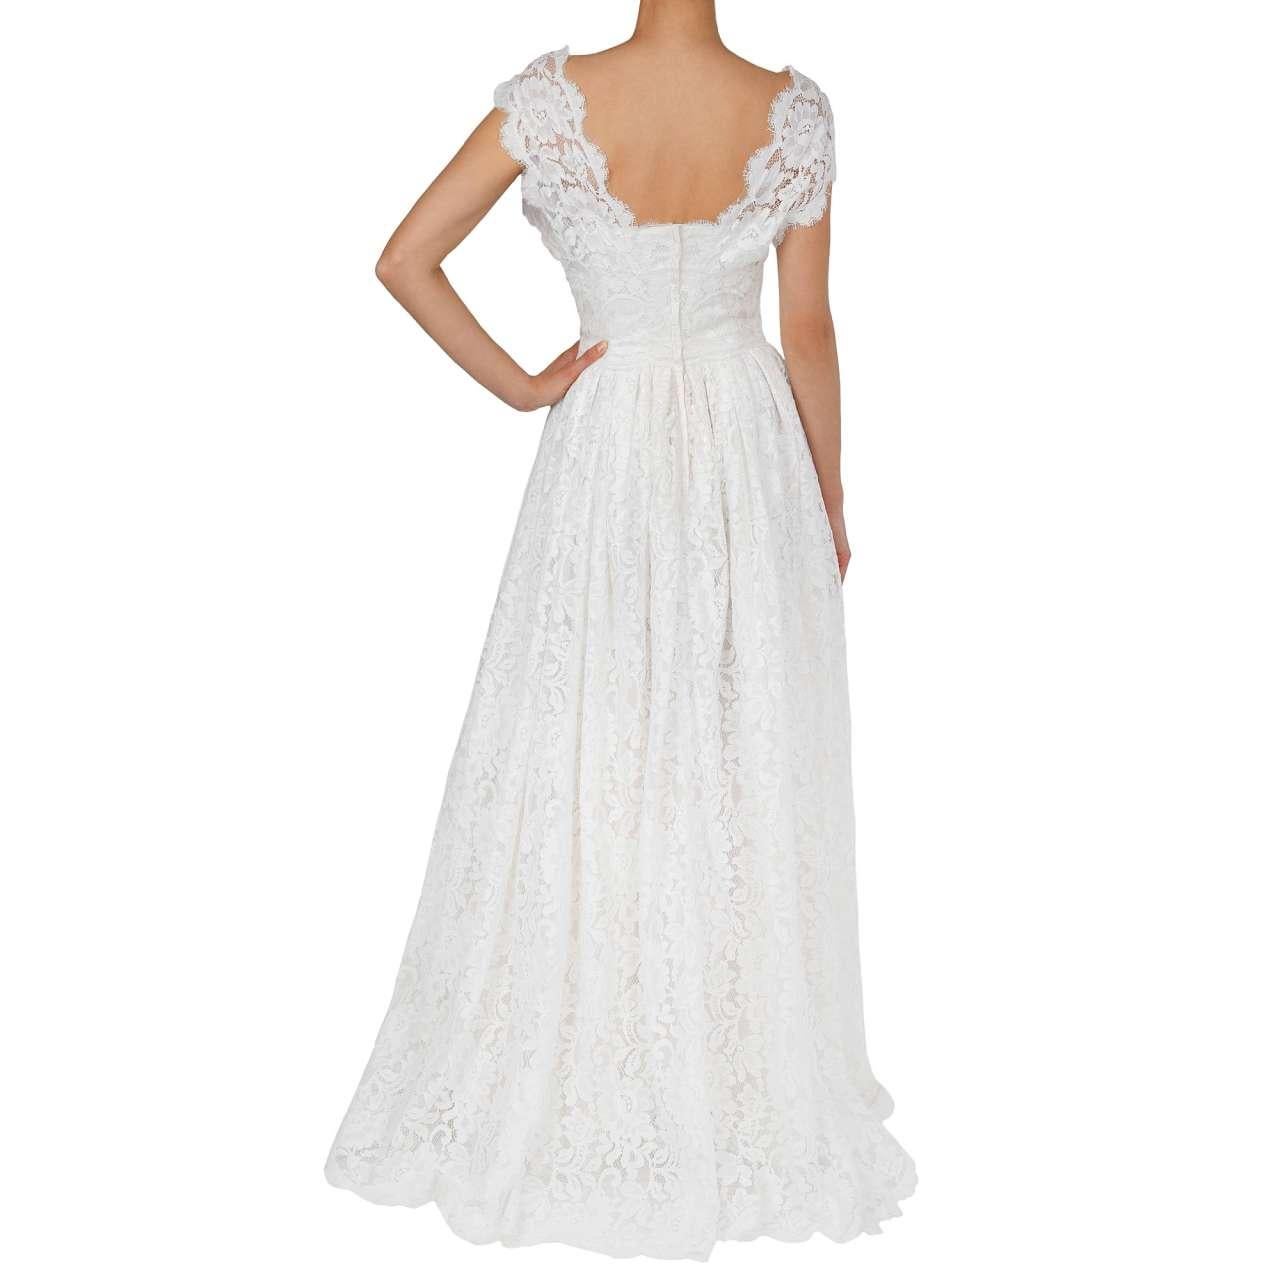 - Long wedding dress with floral lace and silk corsage underdress in white by DOLCE & GABBANA - MADE IN ITALY - New with Tag - Former RRP: EUR 5.950 - Concealed back zip closure - Long - Fitted waist - Silk corsage underdress with lace - Model: